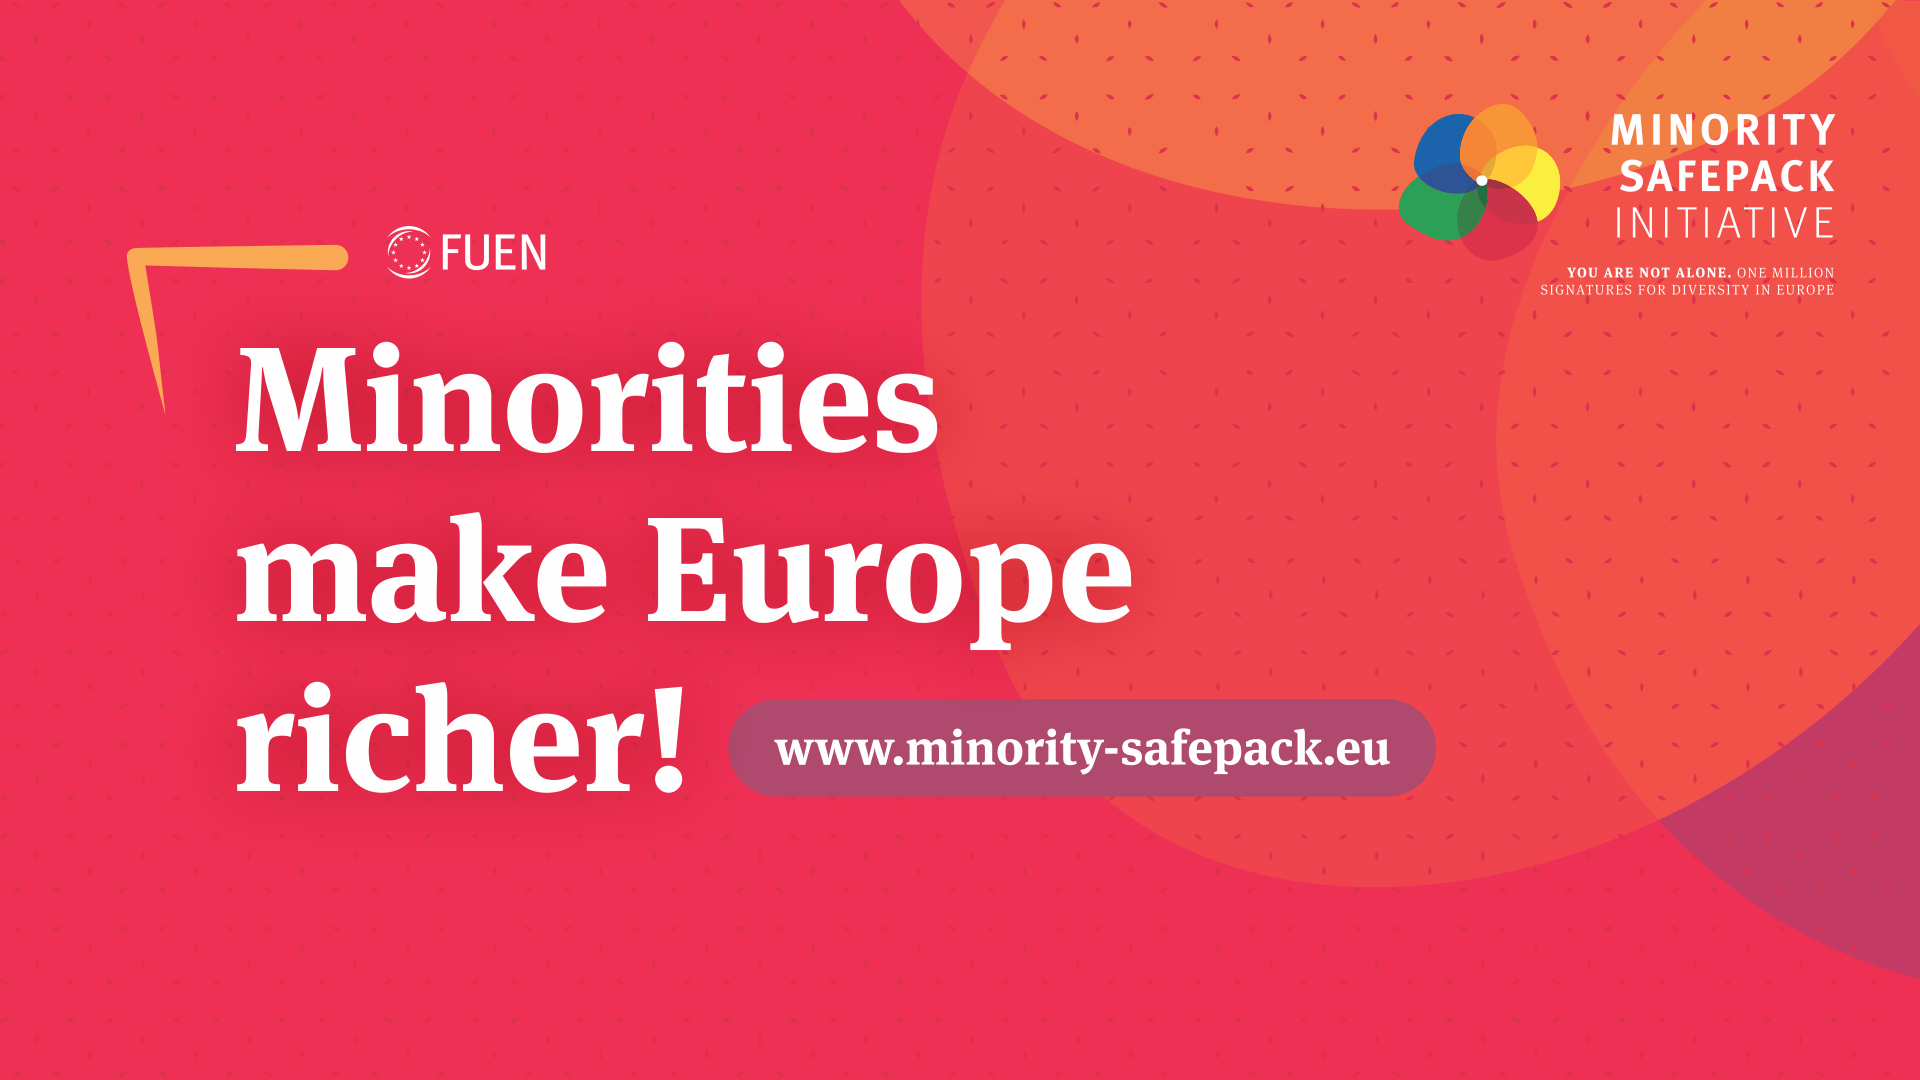 The EFHR is organizing the campaign for the Minority SafePack